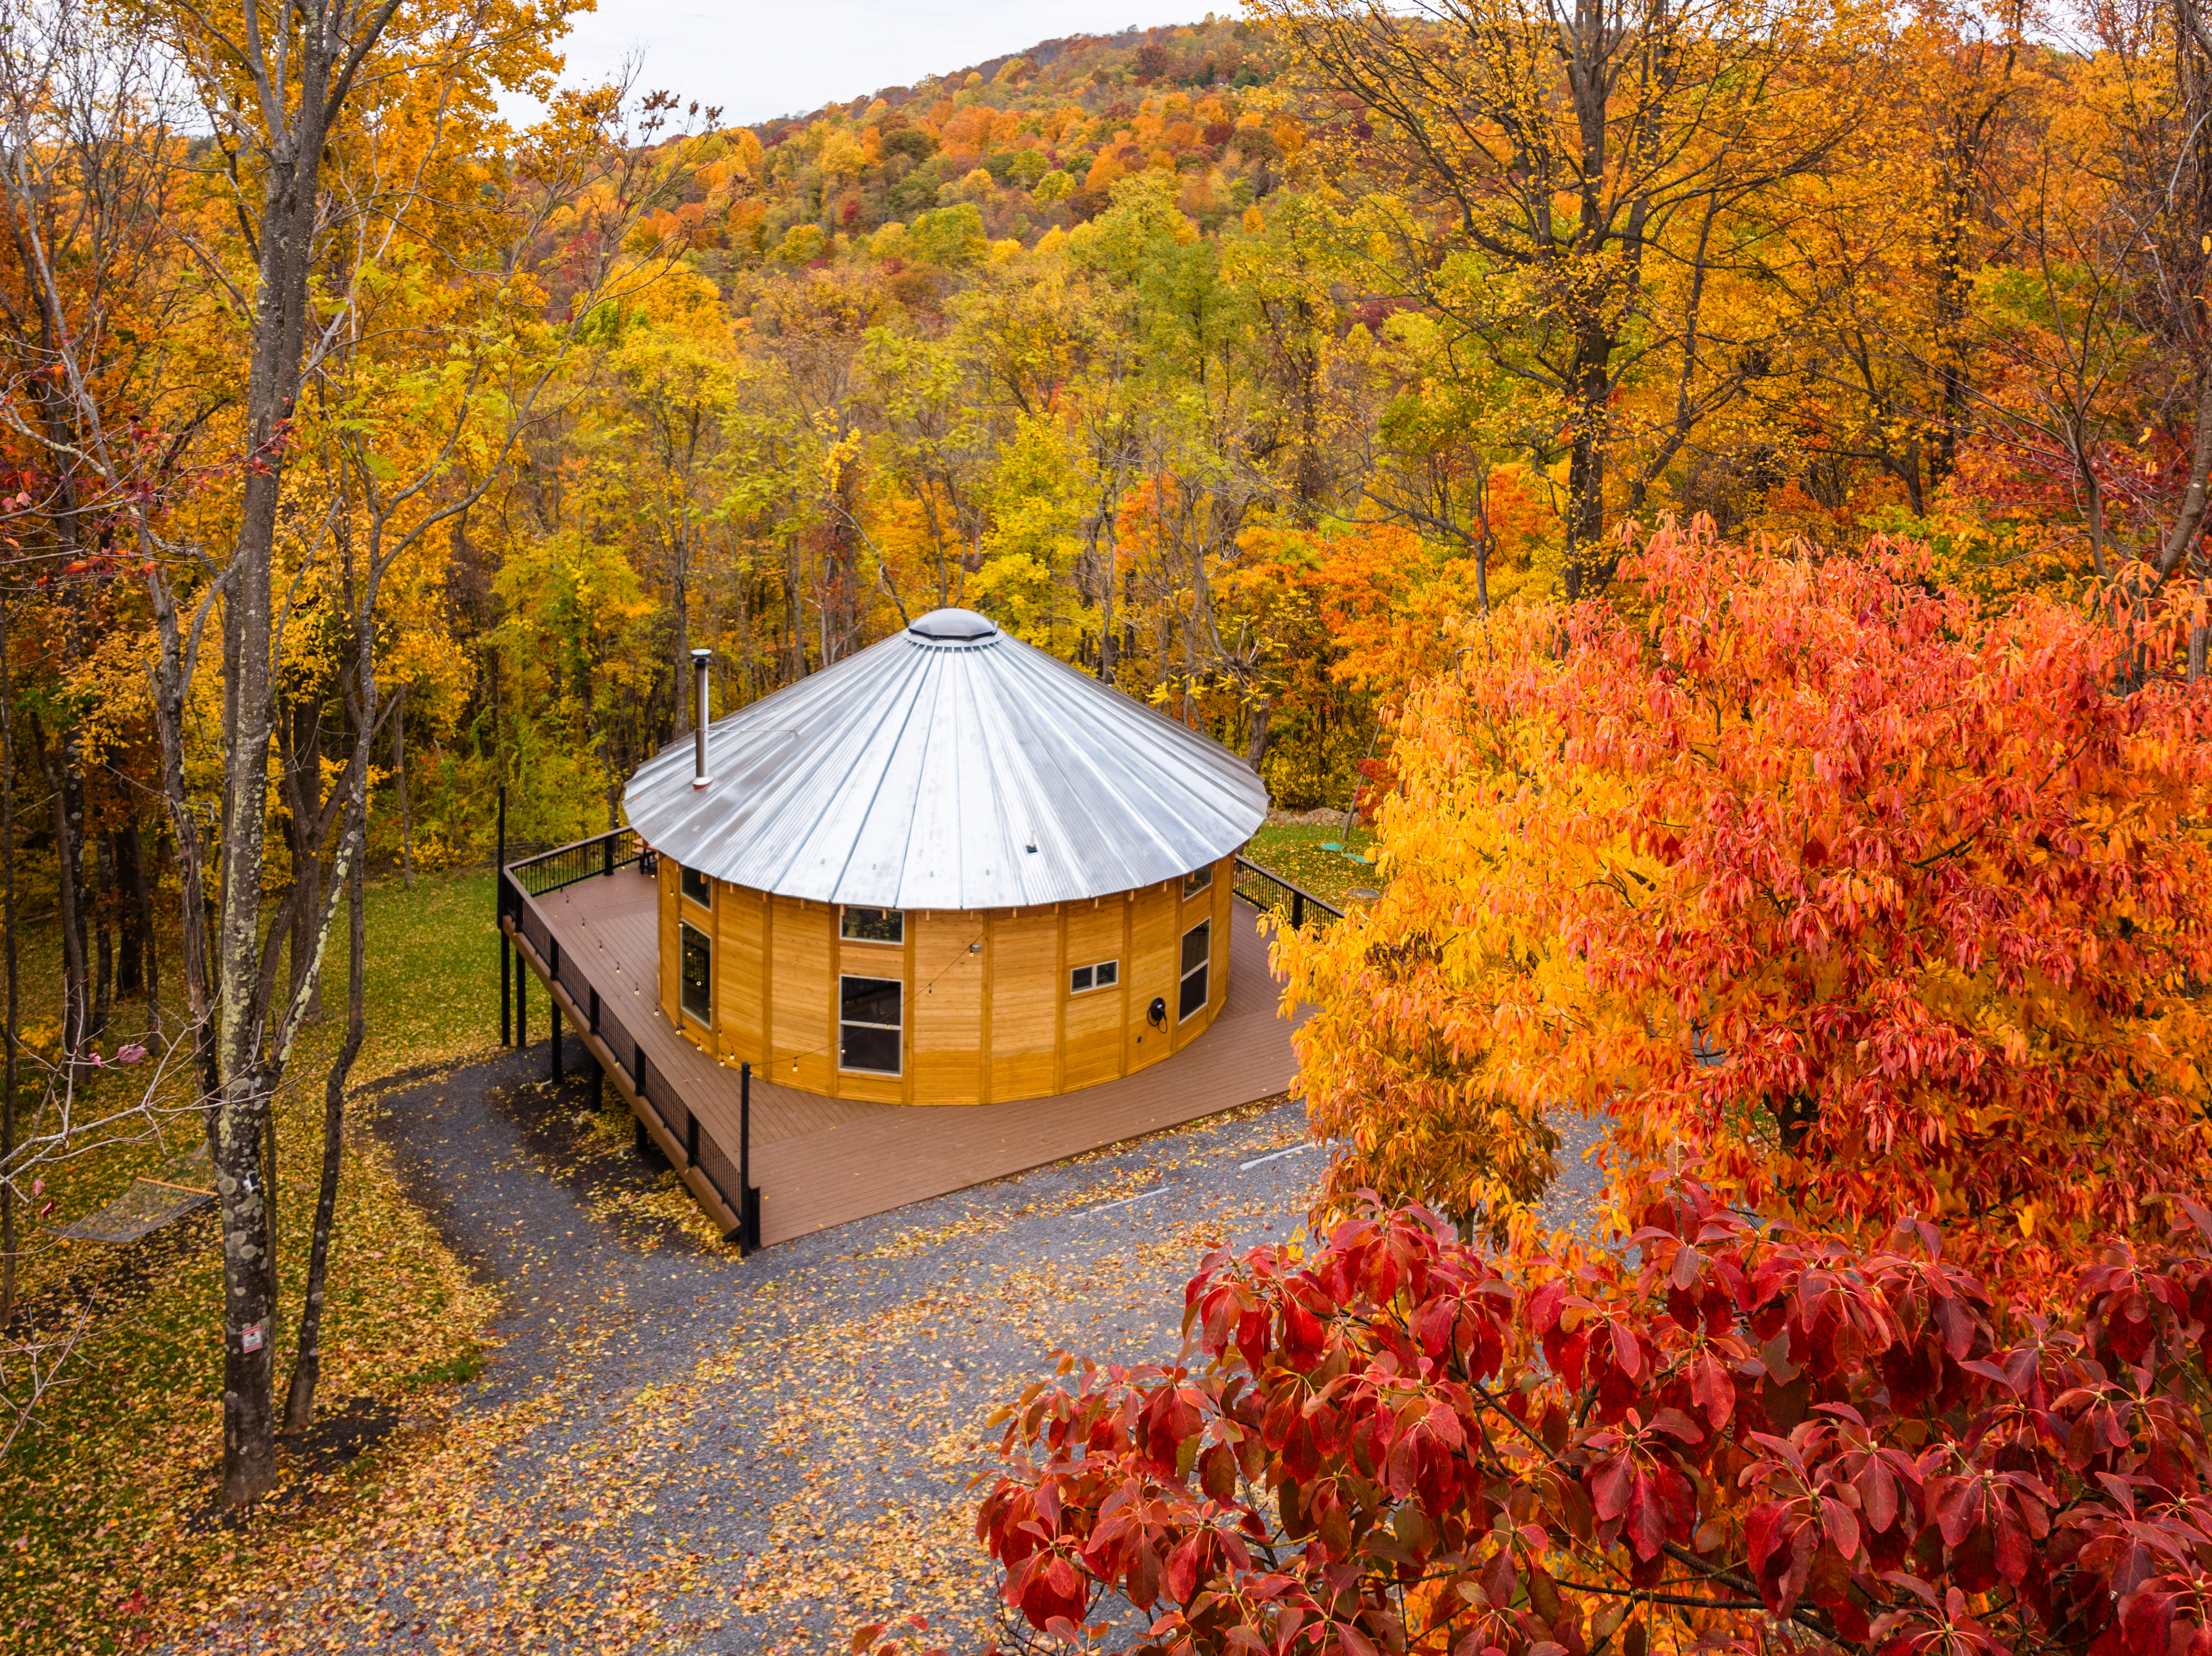 <span  class="uc_style_uc_tiles_grid_image_elementor_uc_items_attribute_title" style="color:#ffffff;">Shenandoah Yurt encircled by a tapestry of vibrant fall foliage and the gentle embrace of autumn</span>